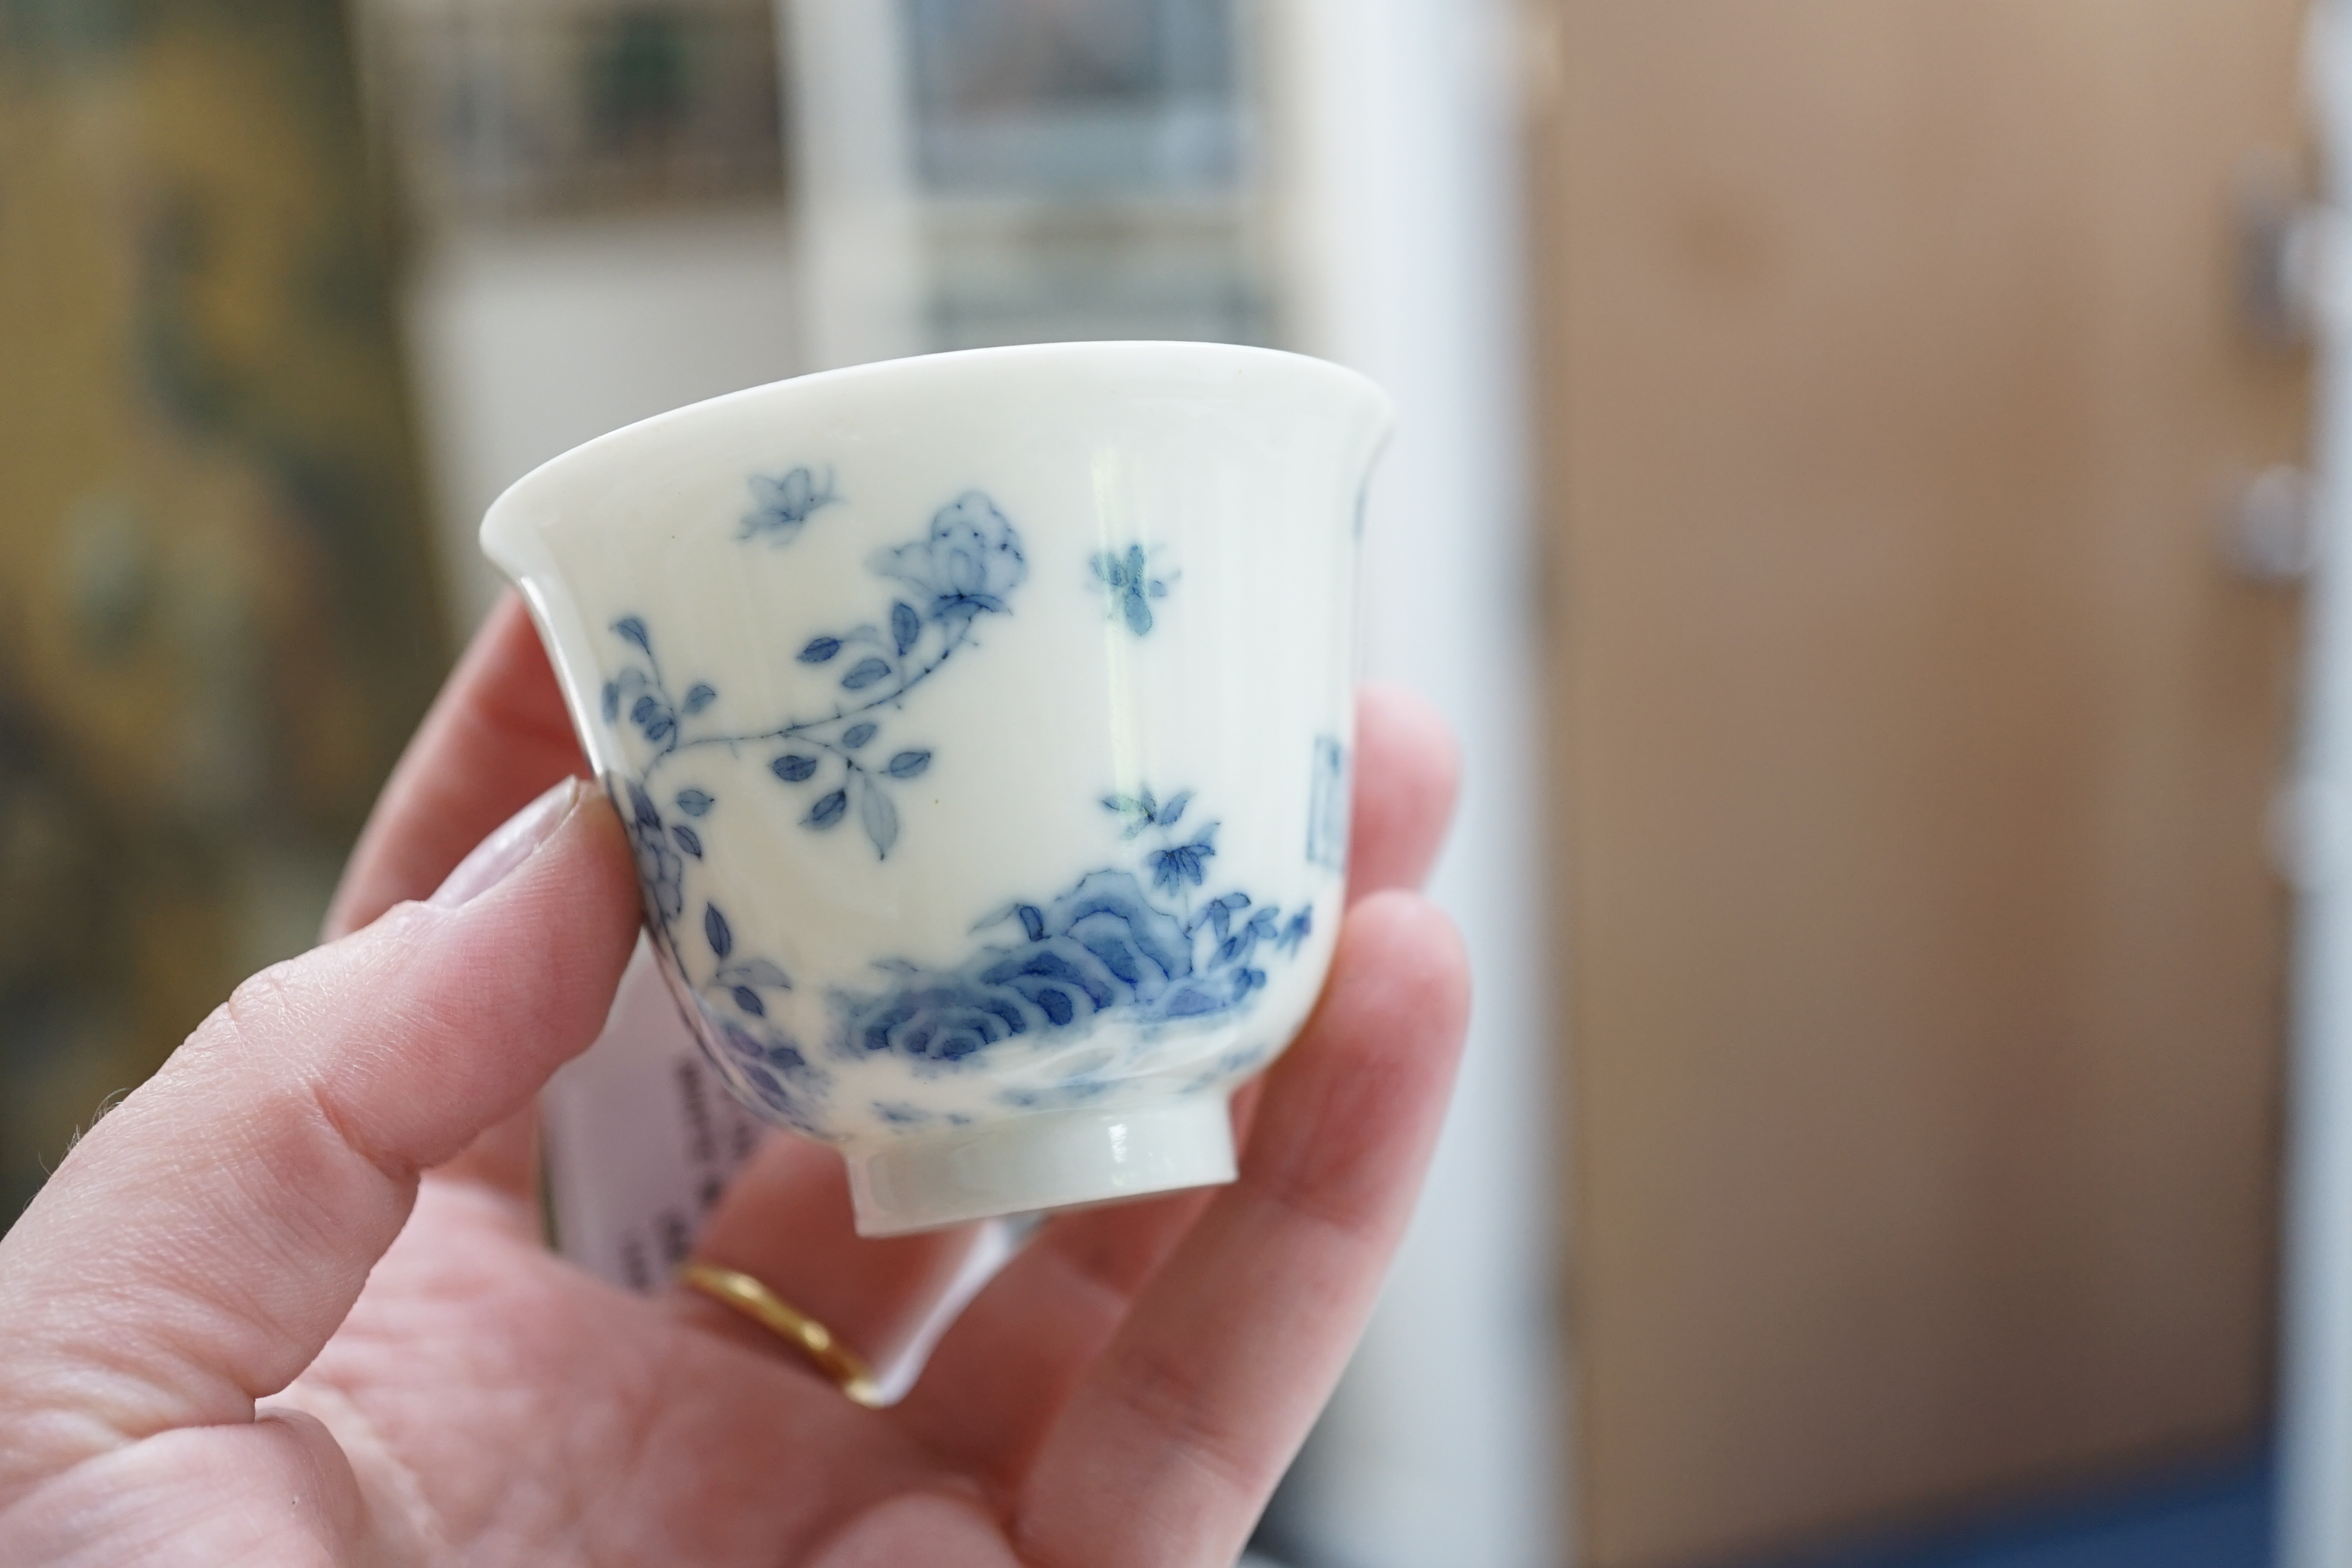 A Chinese blue and white 'month' cup, Kangxi mark, probably late 19th century